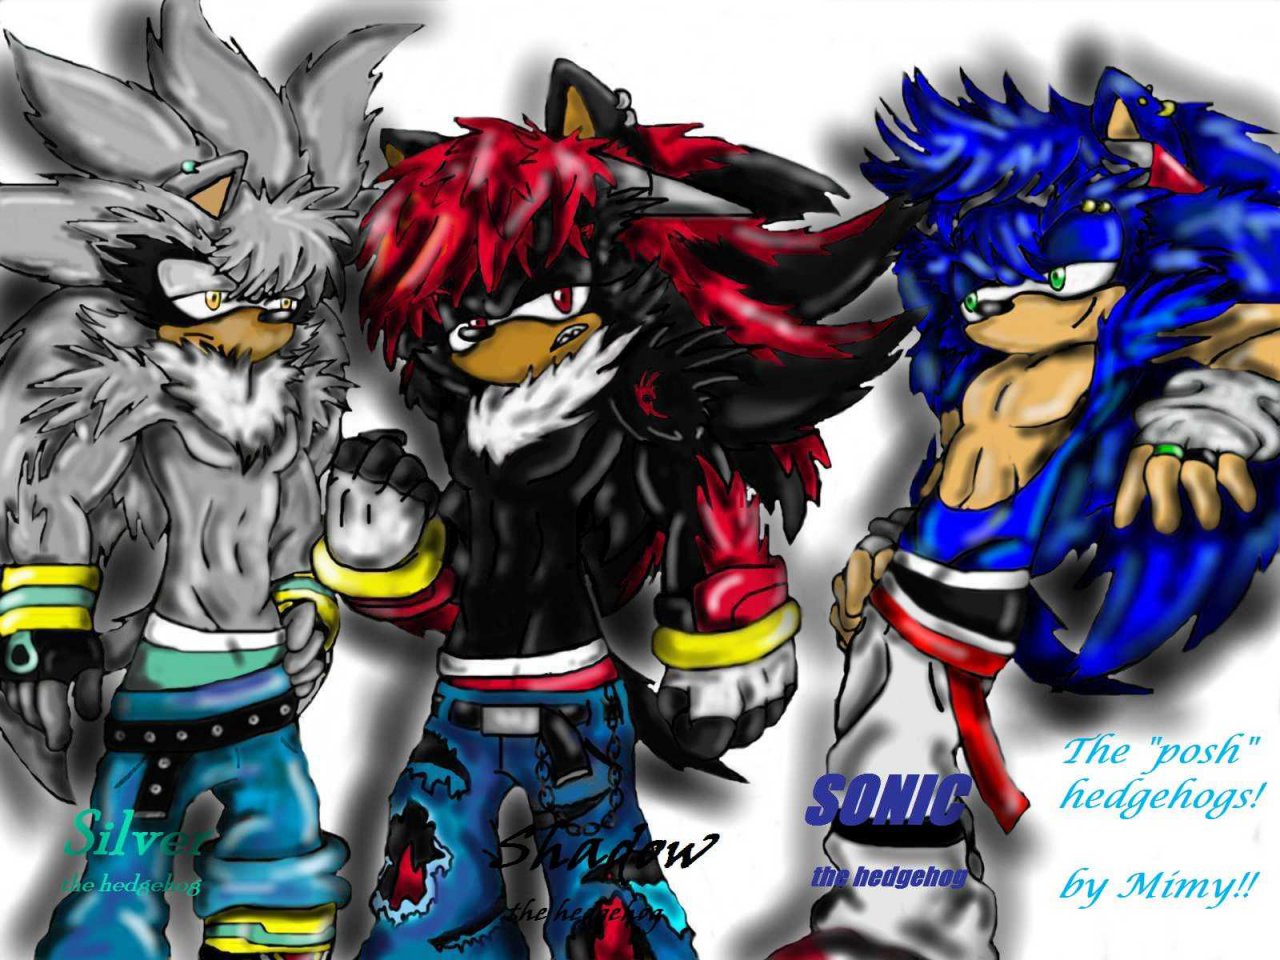 Shadow - Sonic - Silver  Sonic and shadow, Sonic, Sonic the hedgehog